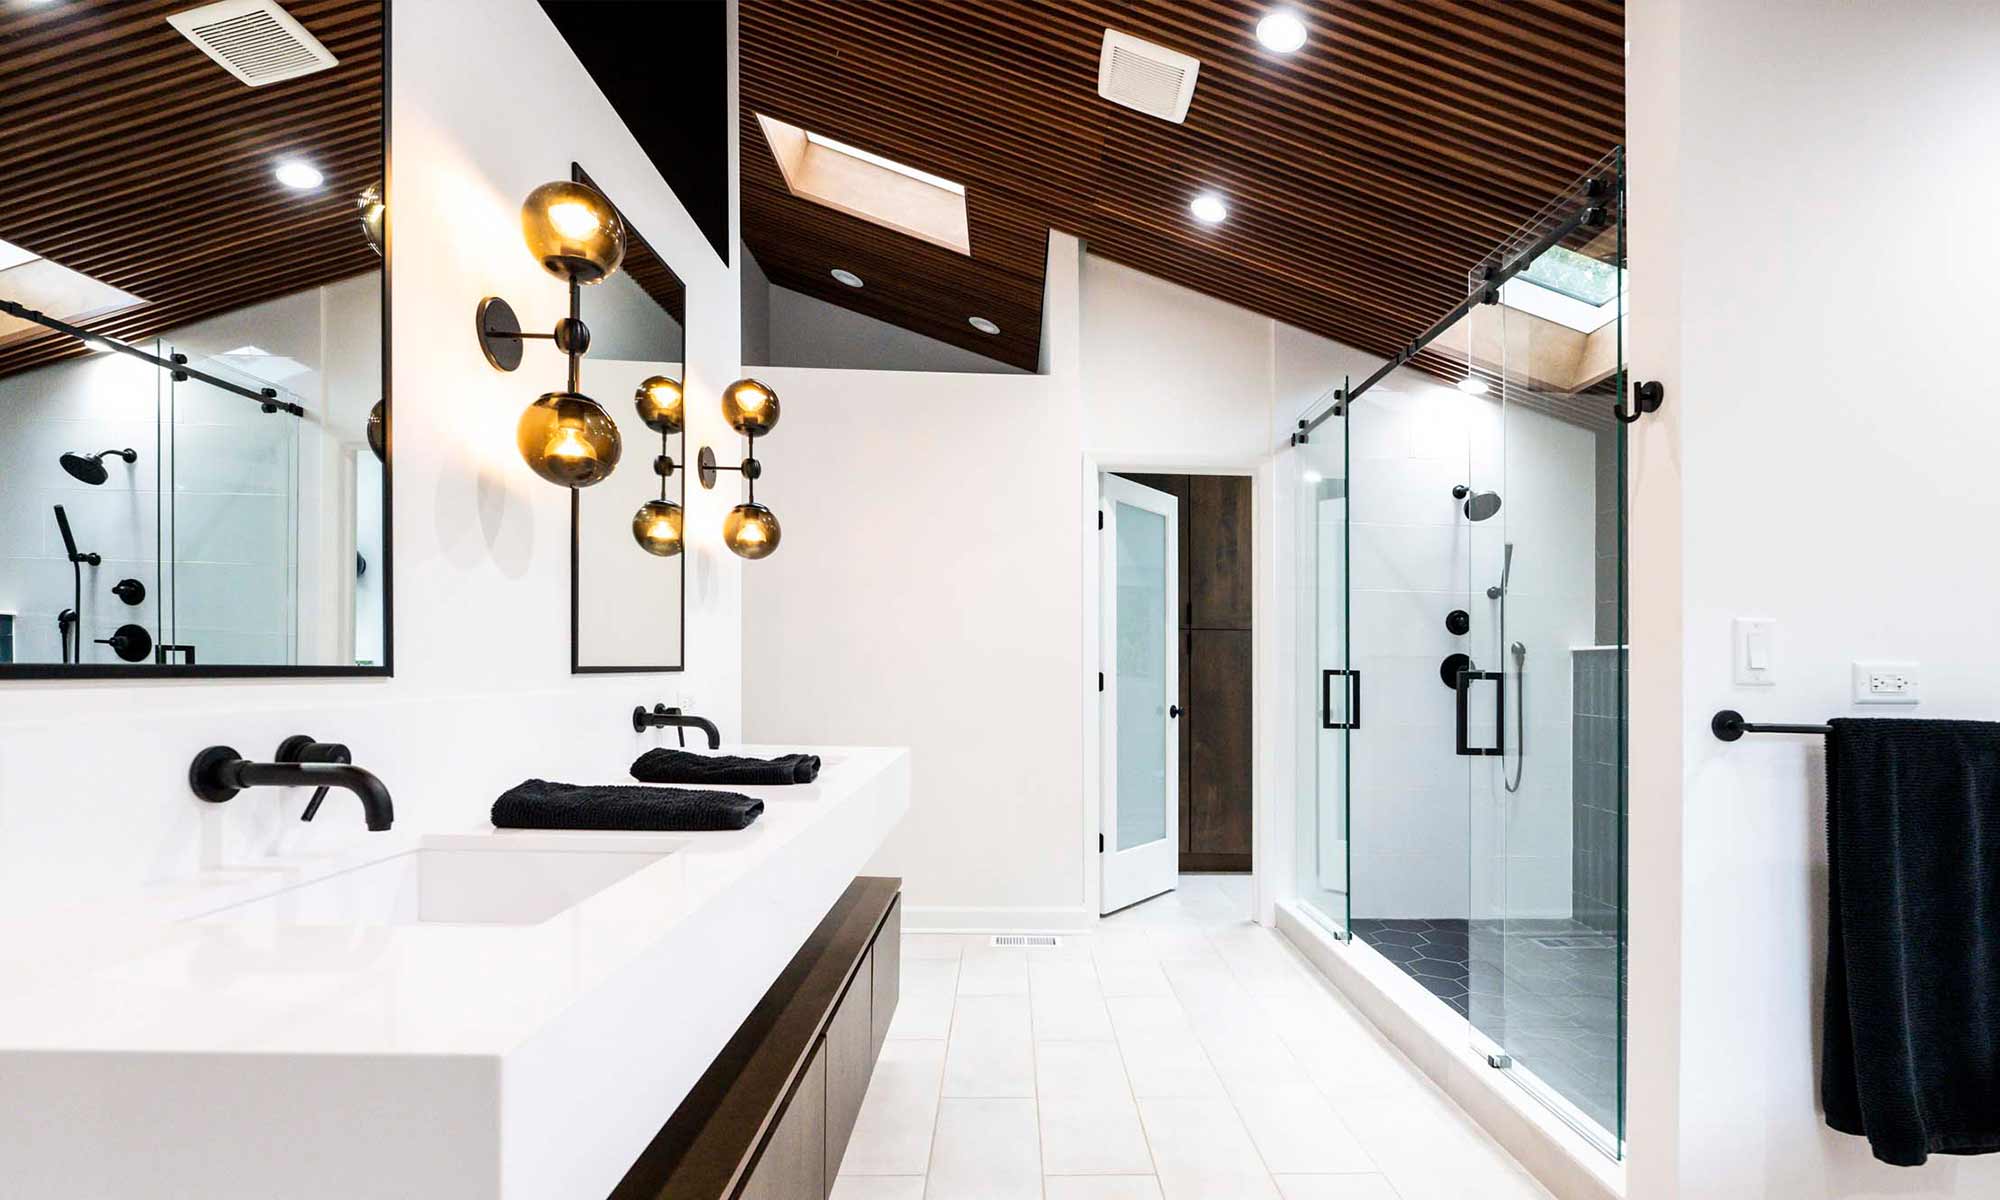 luxury California style modern bathroom remodel by LivCo in Hinsdale Illinois with wood ceiling